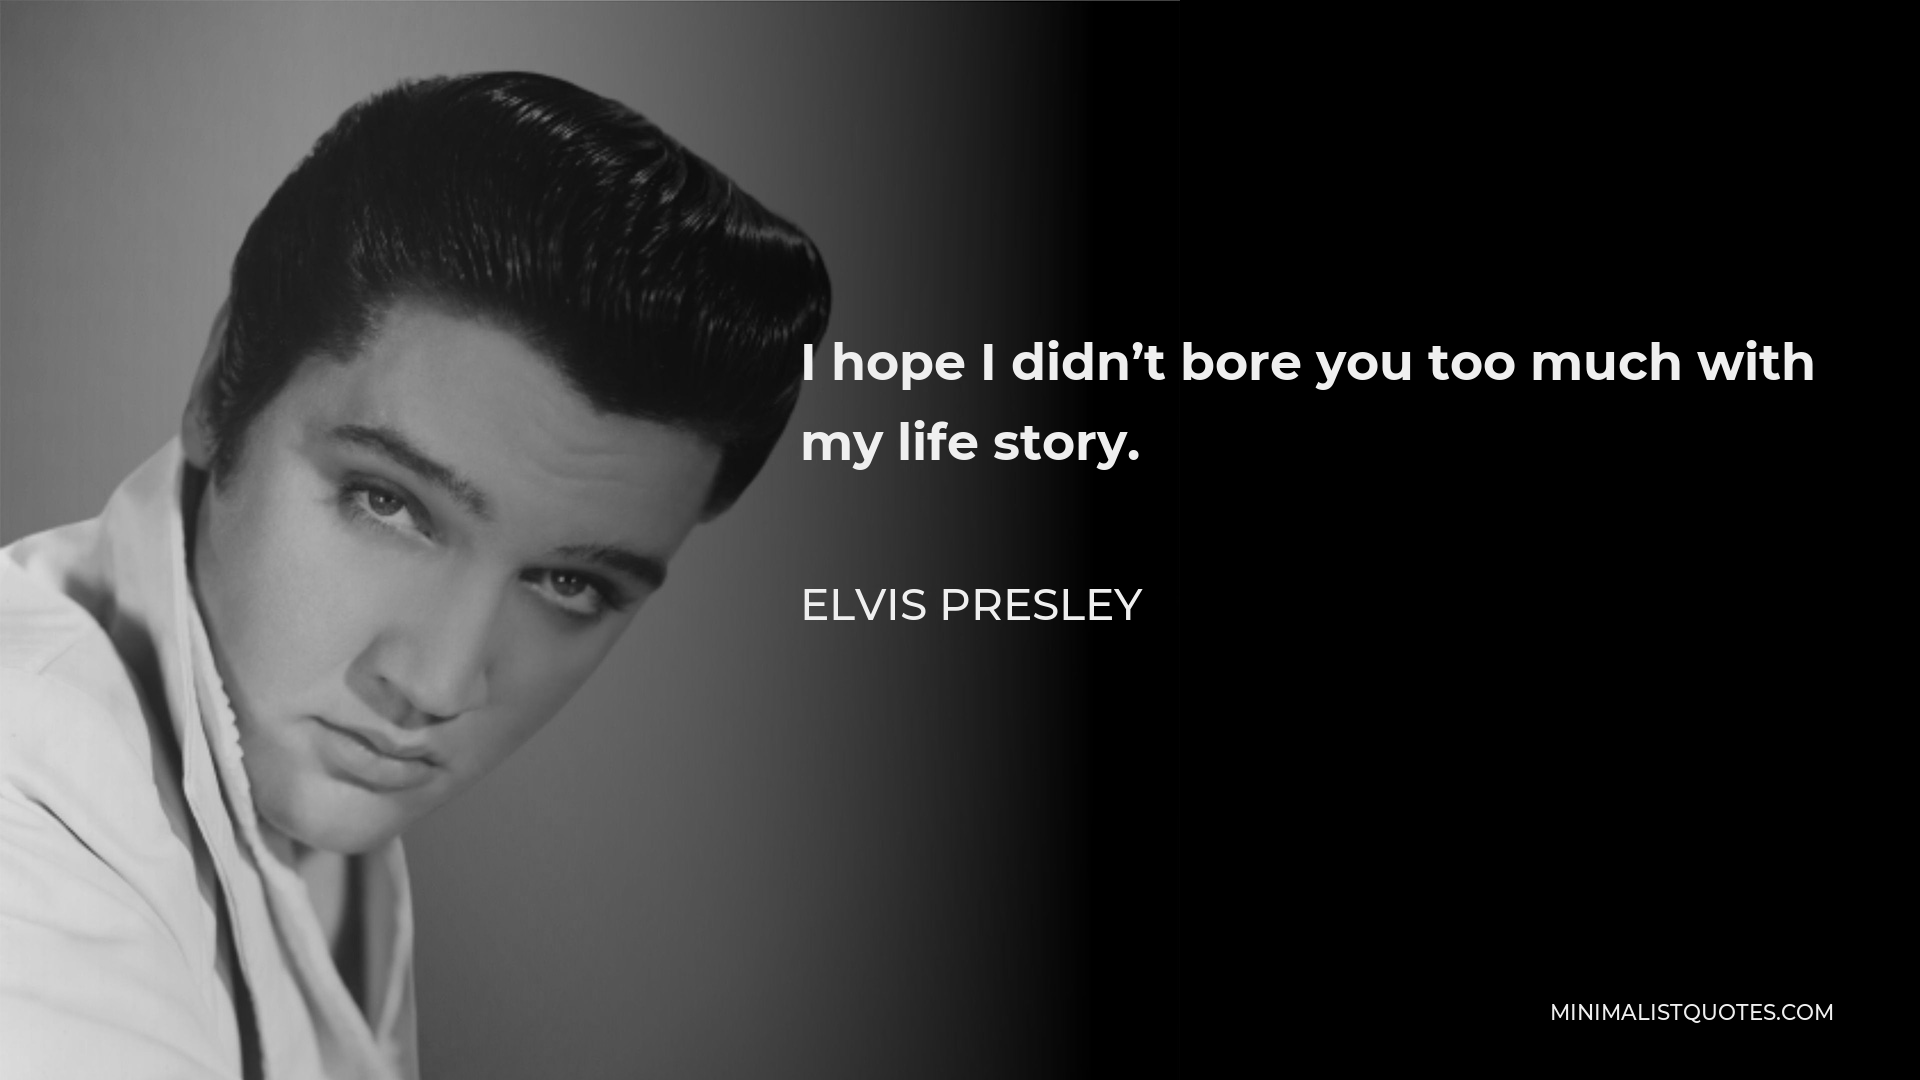 Elvis Presley Quote - I hope I didn’t bore you too much with my life story.